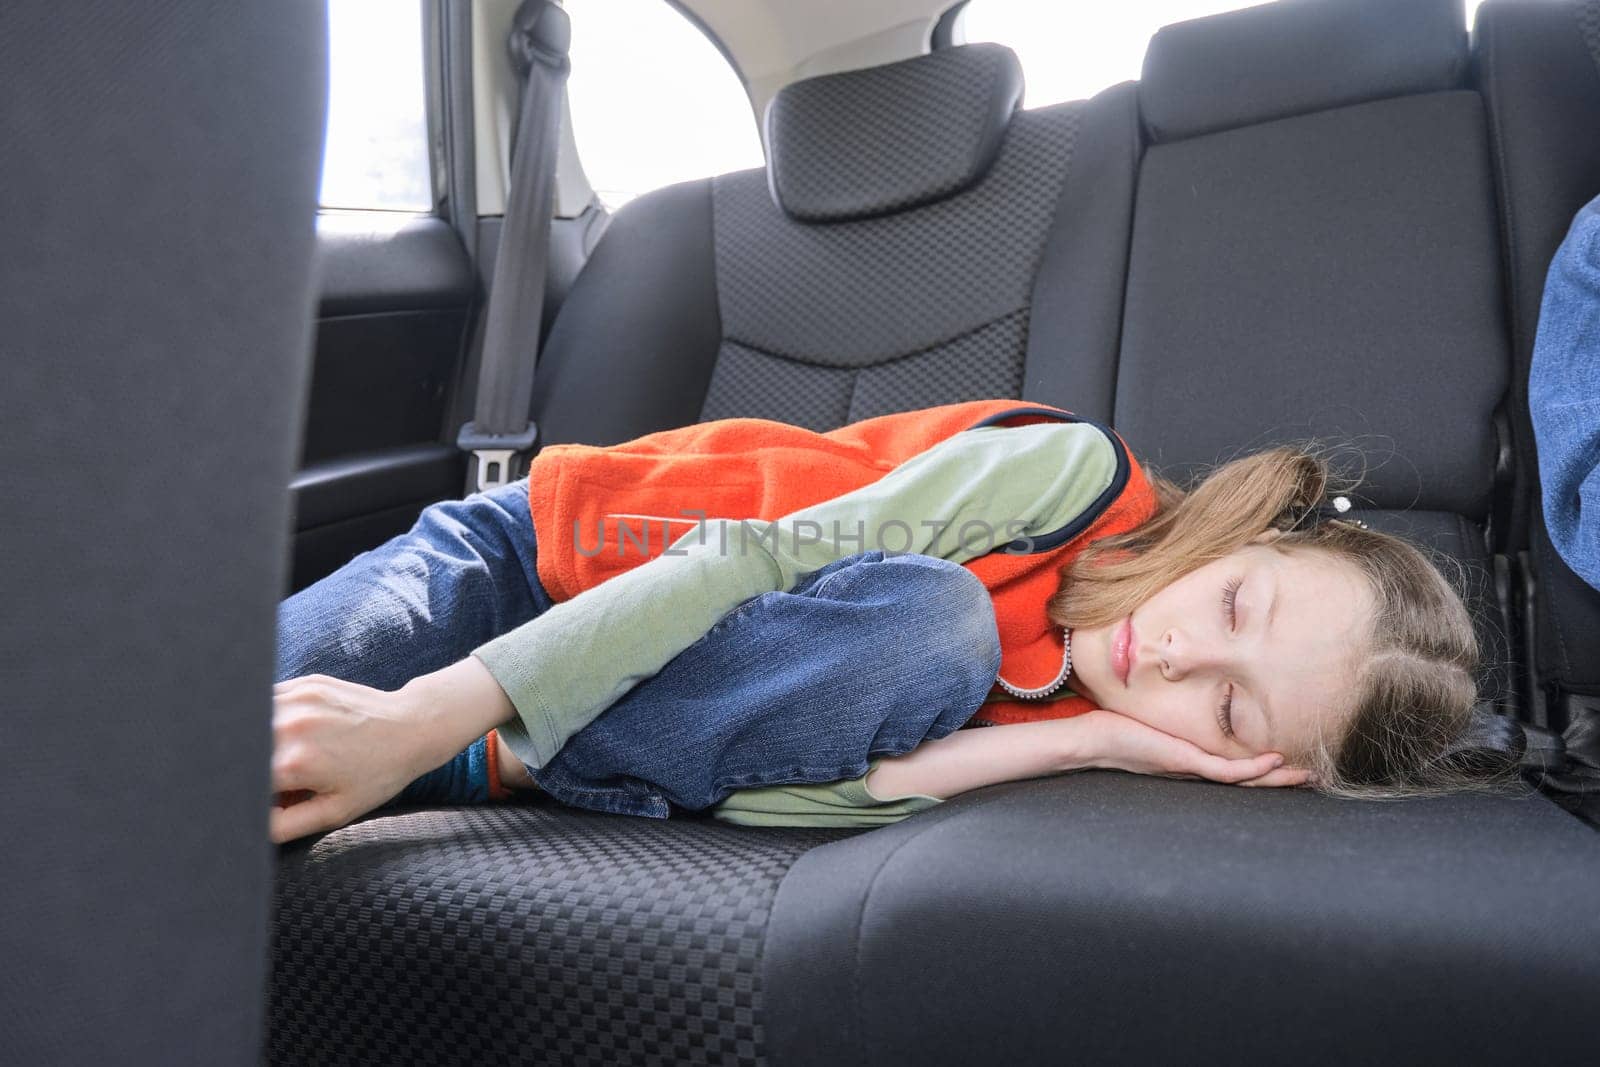 9 year old girl sleeping in car, child lying in the back seat of vehicle.